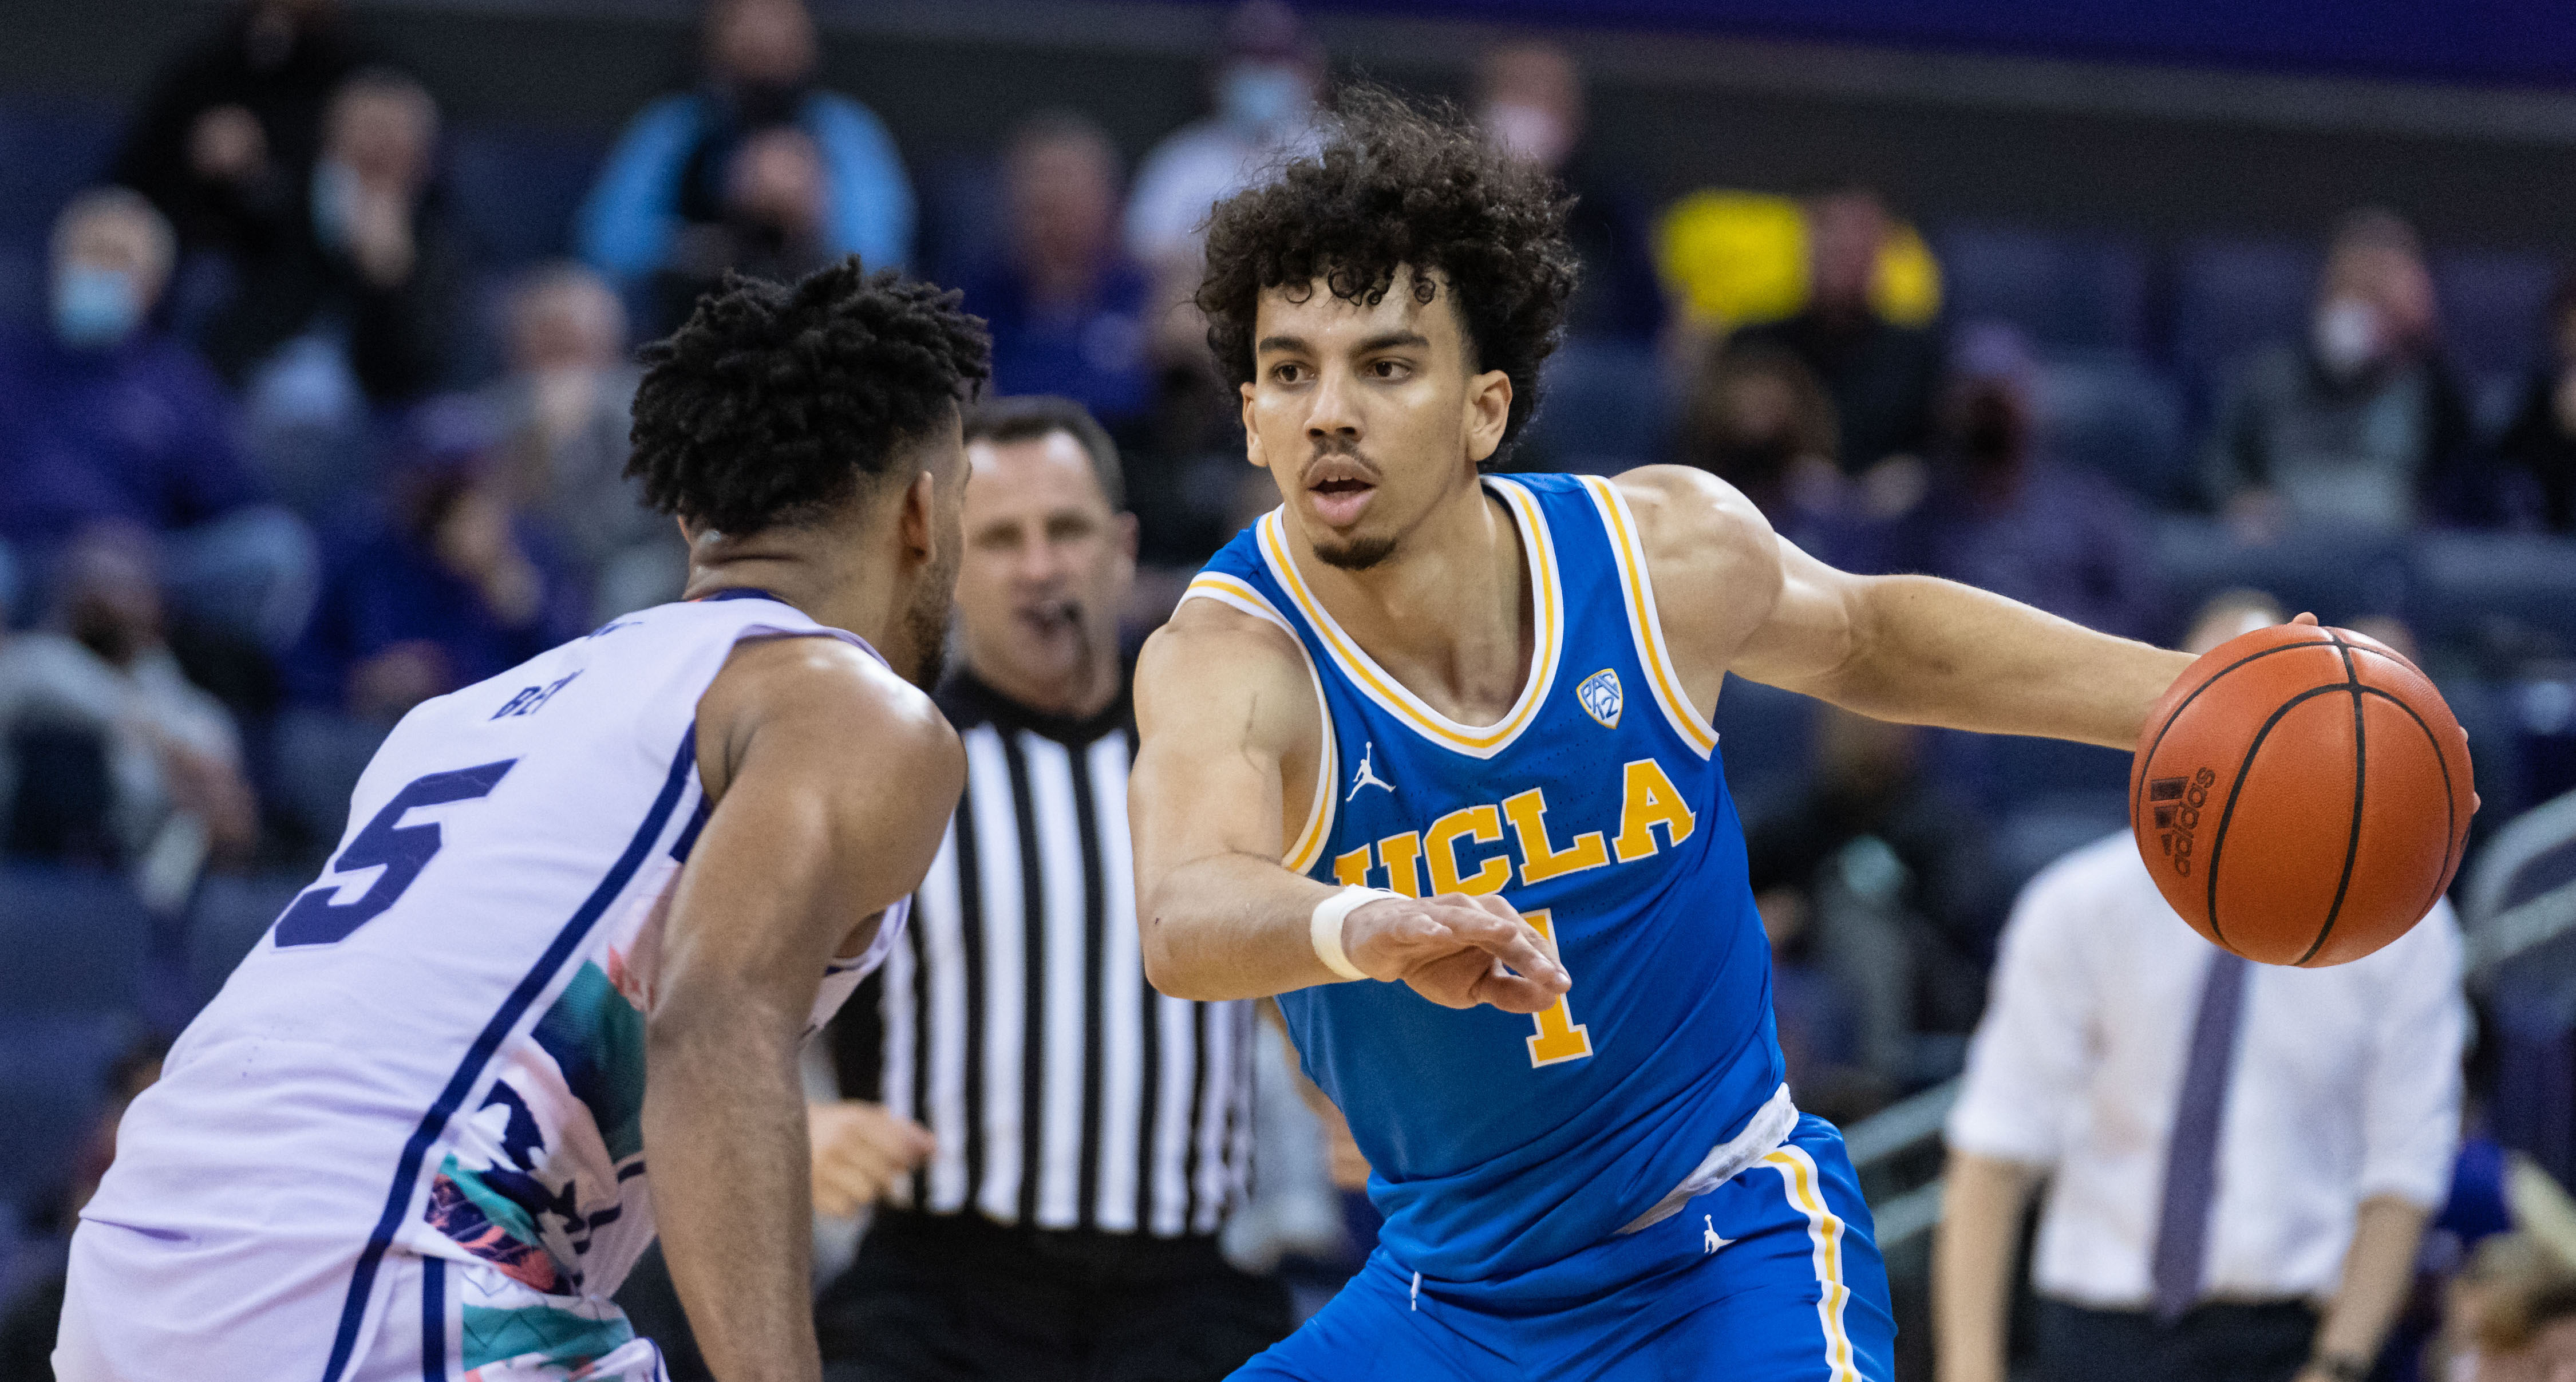 UCLA's Jules Bernard Signs With Detroit Pistons as Undrafted Free Agent ...